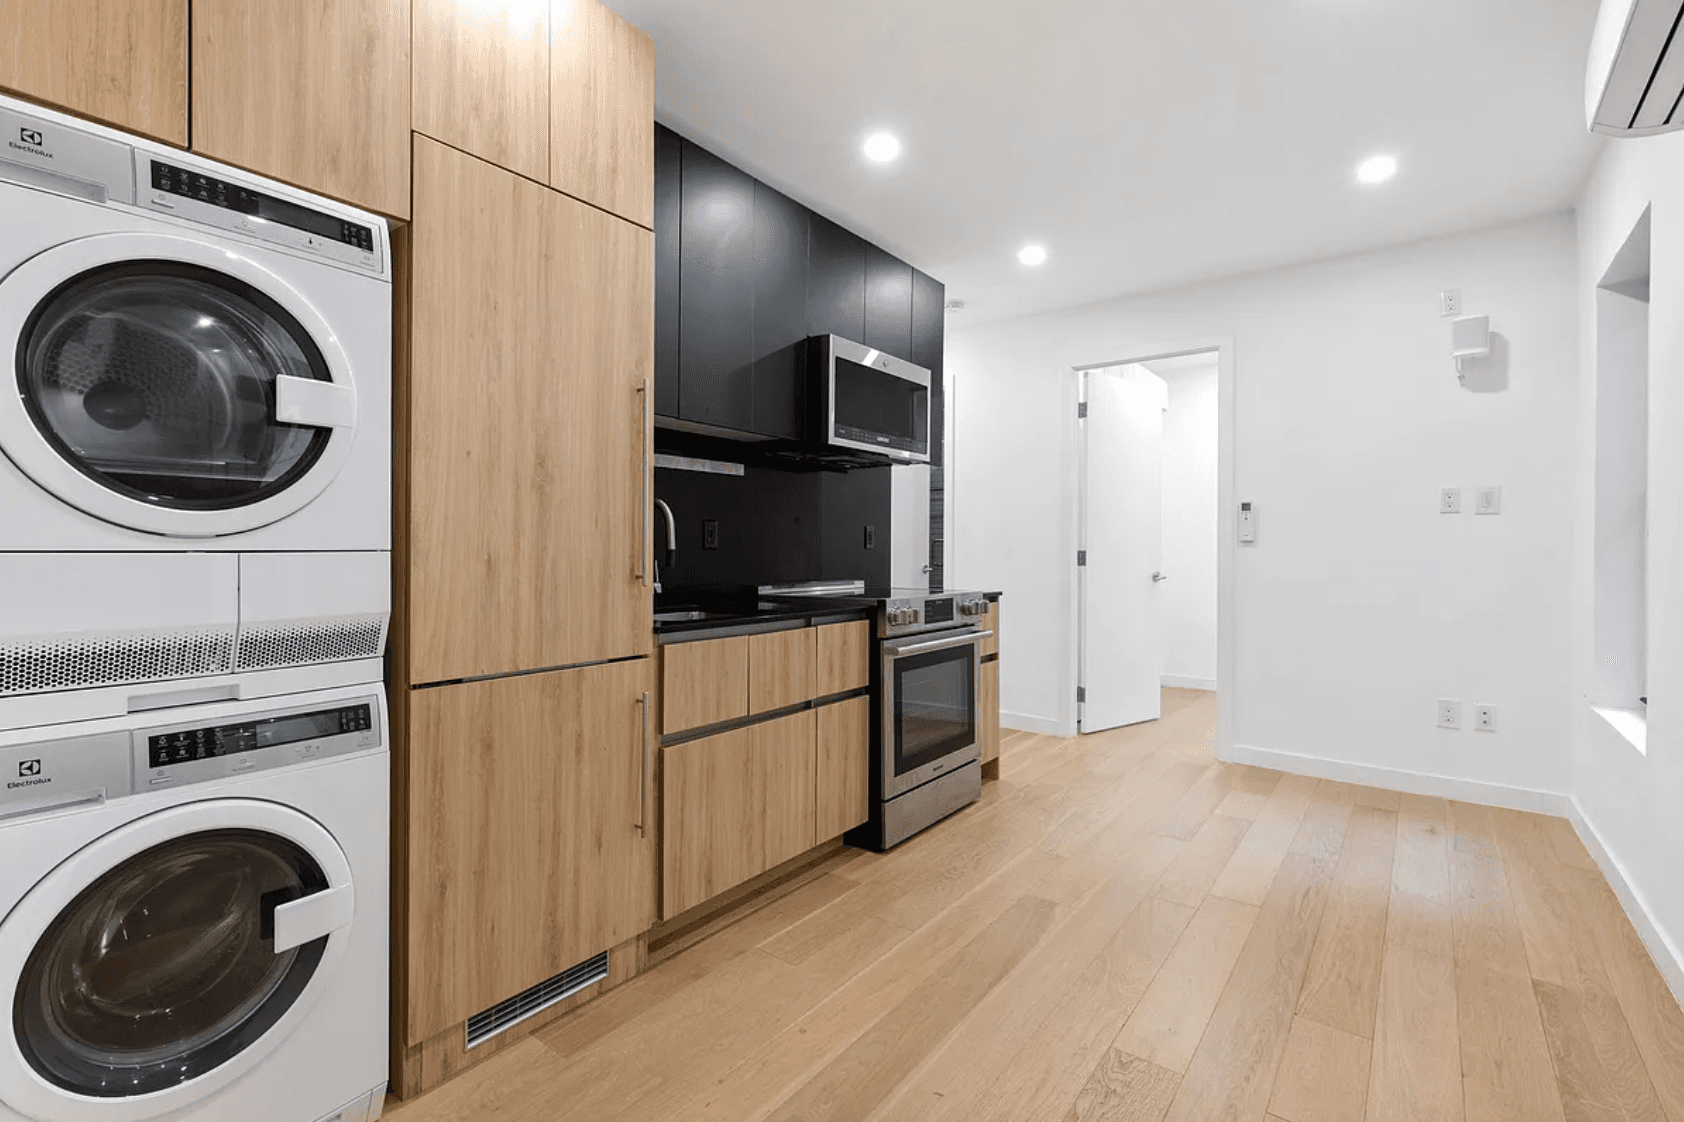 Renovated beautiful 3 bedroom 2 bath apartment with wide plank oak wood flooring, stainless steel appliances, Caesarstone countertops, IN UNIT washer dryer, renovated bathroom with radiant heated floors and brass ...